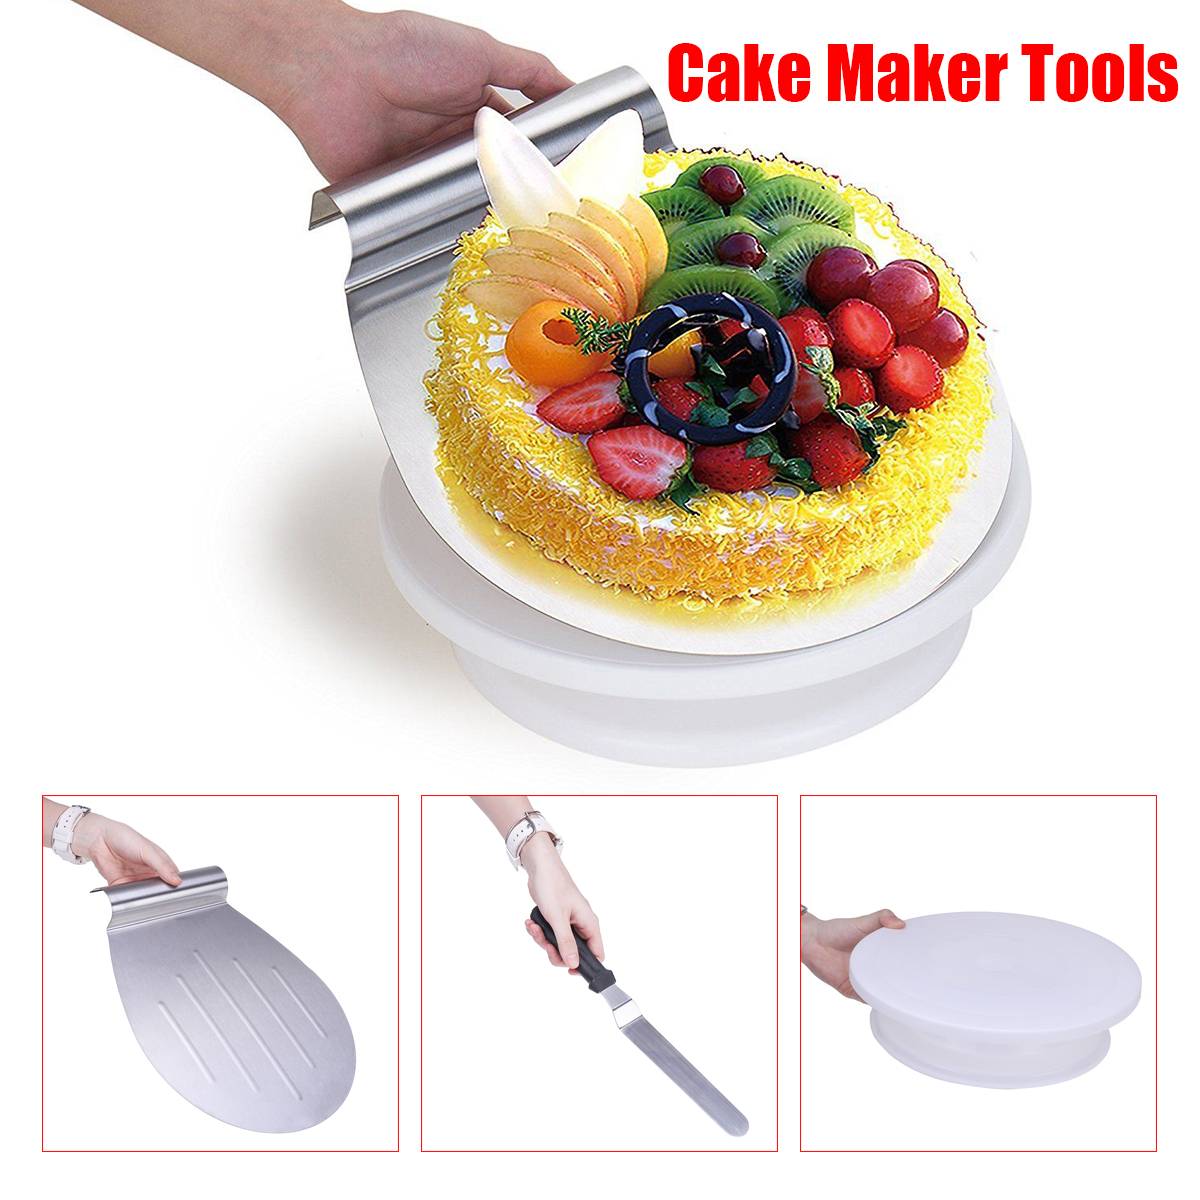 28cm-Rotating-Cake-Icing-Decorating-Revolving-Display-Stand-Turntable-Smoother-1515760-1